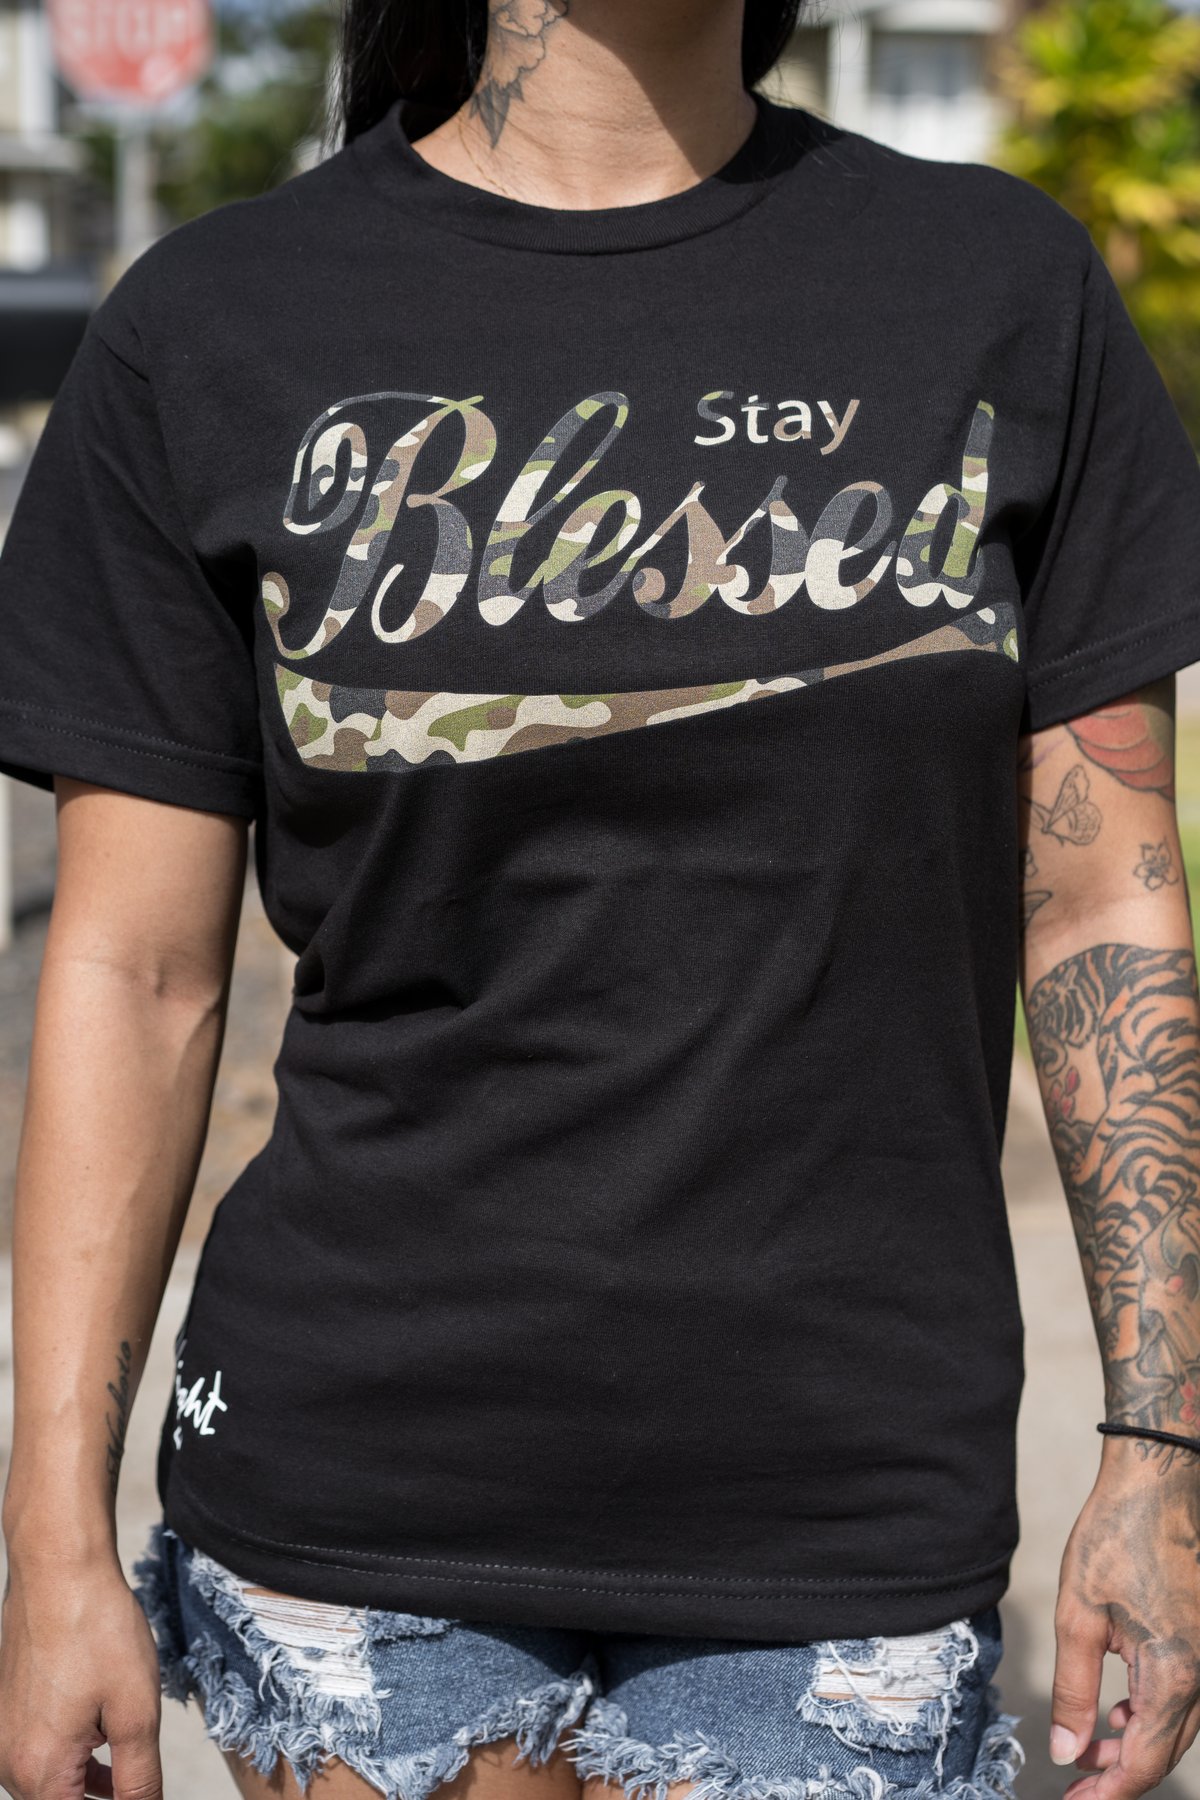 Stay Blessed Tee (Black/Camo)